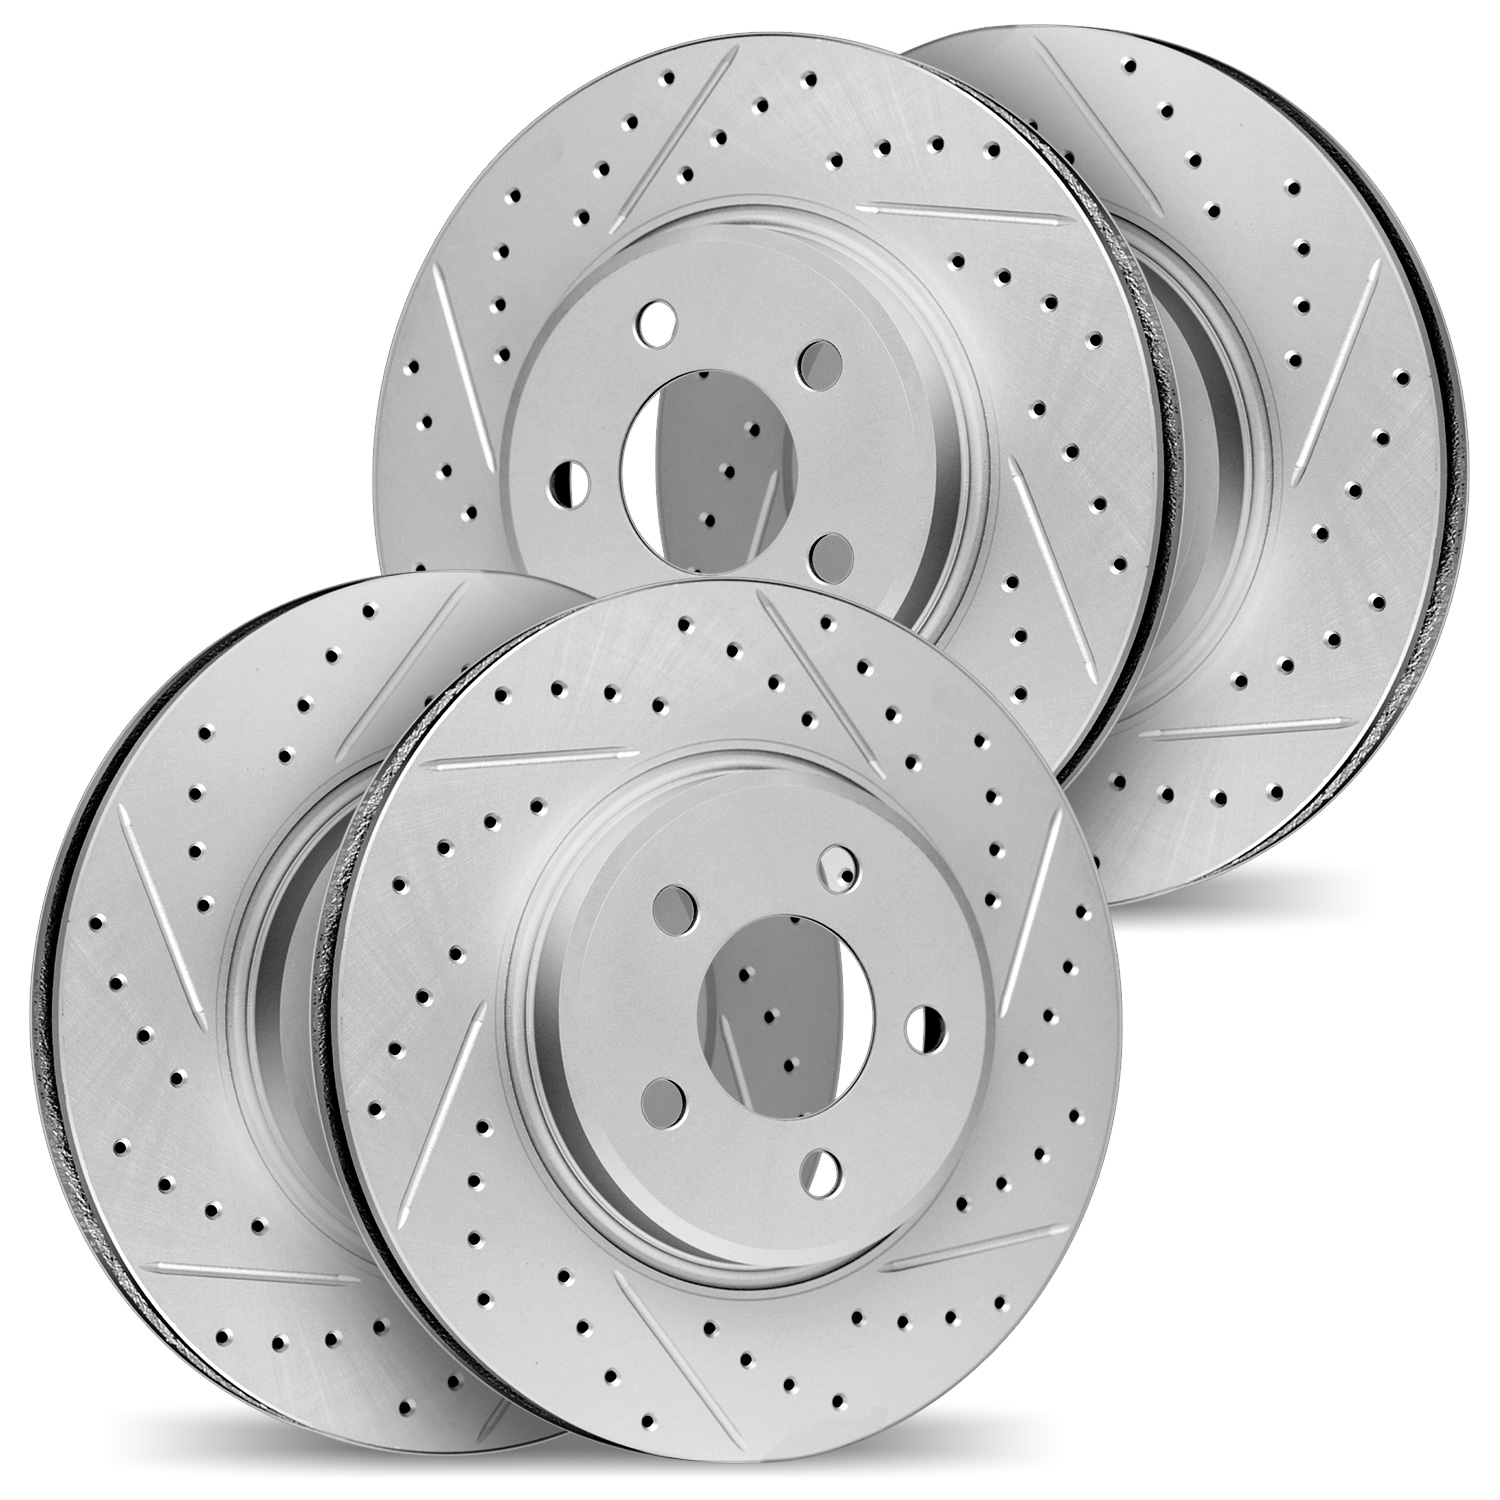 2004-67010 Geoperformance Drilled/Slotted Brake Rotors, Fits Select Infiniti/Nissan, Position: Front and Rear